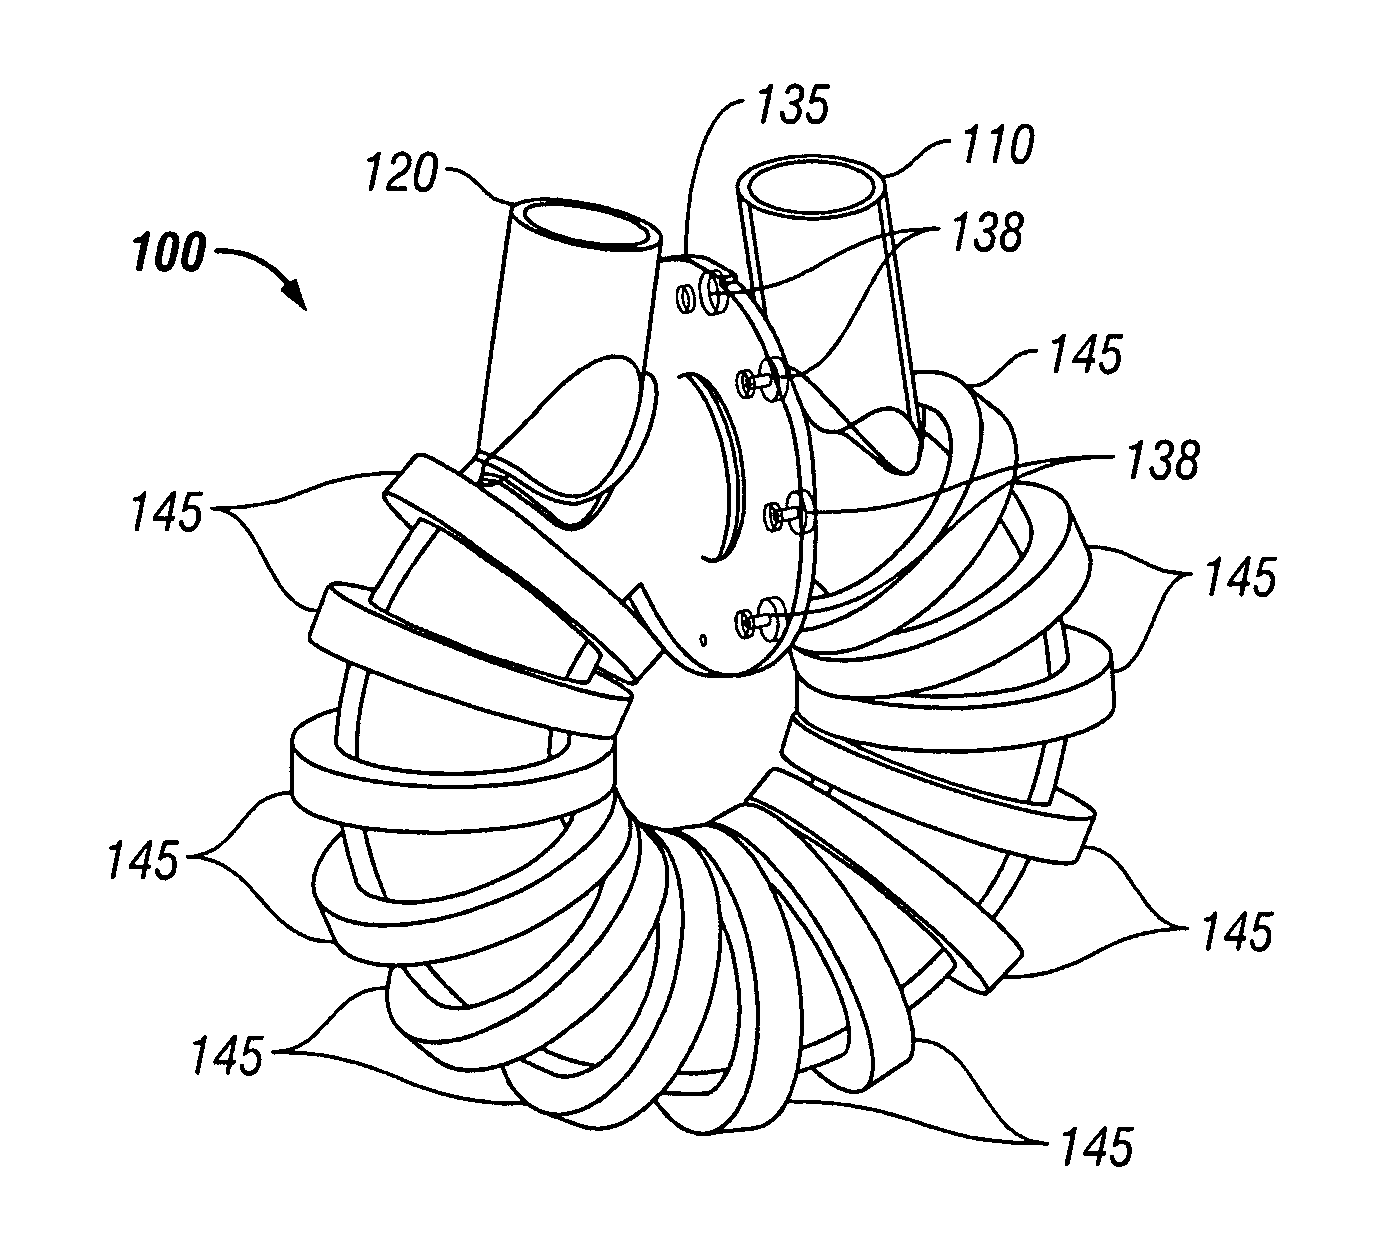 System and method for pump with deformable bearing surface